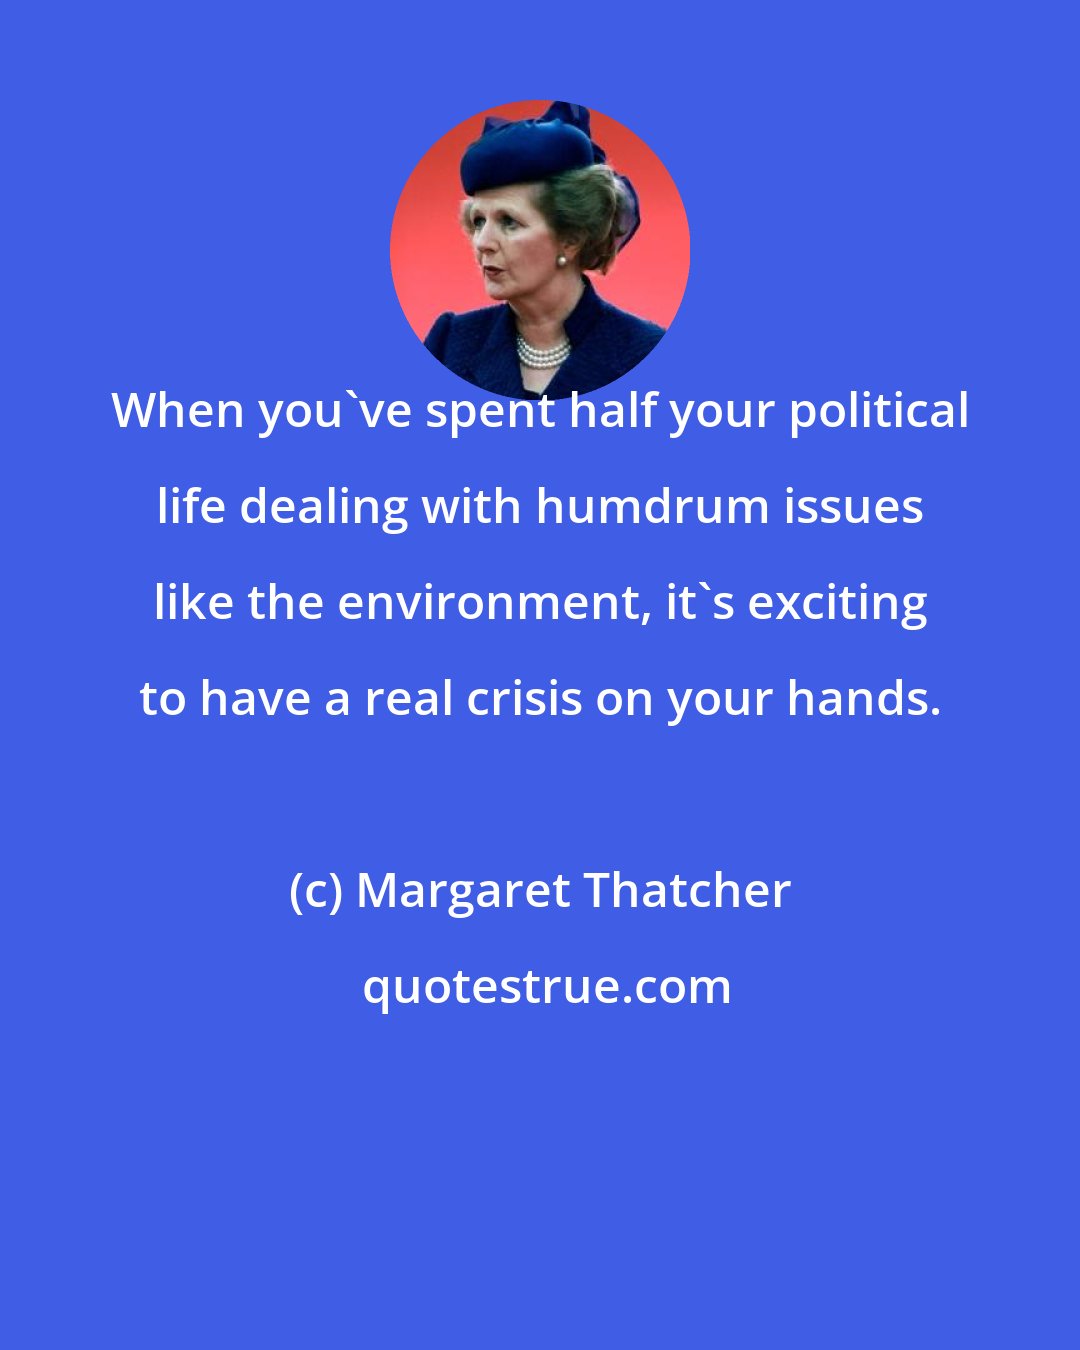 Margaret Thatcher: When you've spent half your political life dealing with humdrum issues like the environment, it's exciting to have a real crisis on your hands.